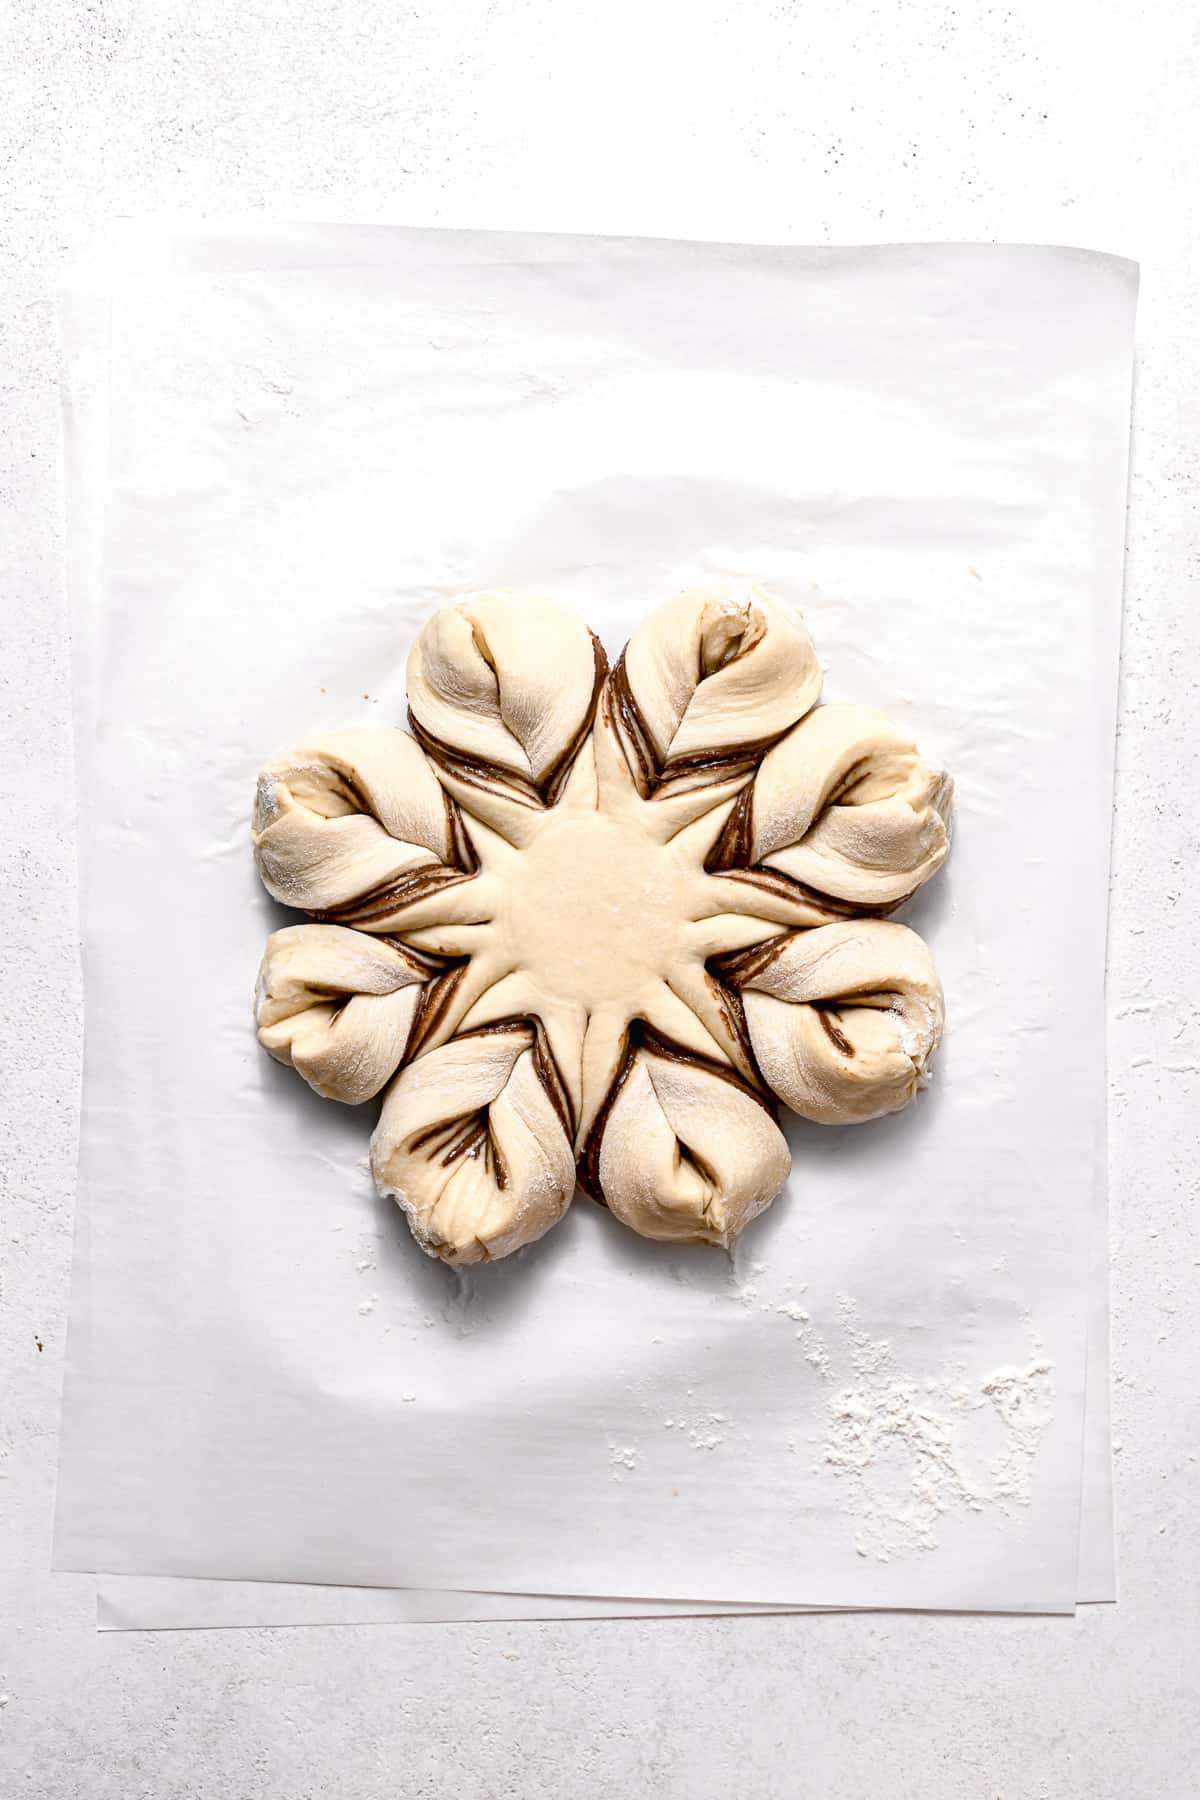 shaped star bread on parchment paper